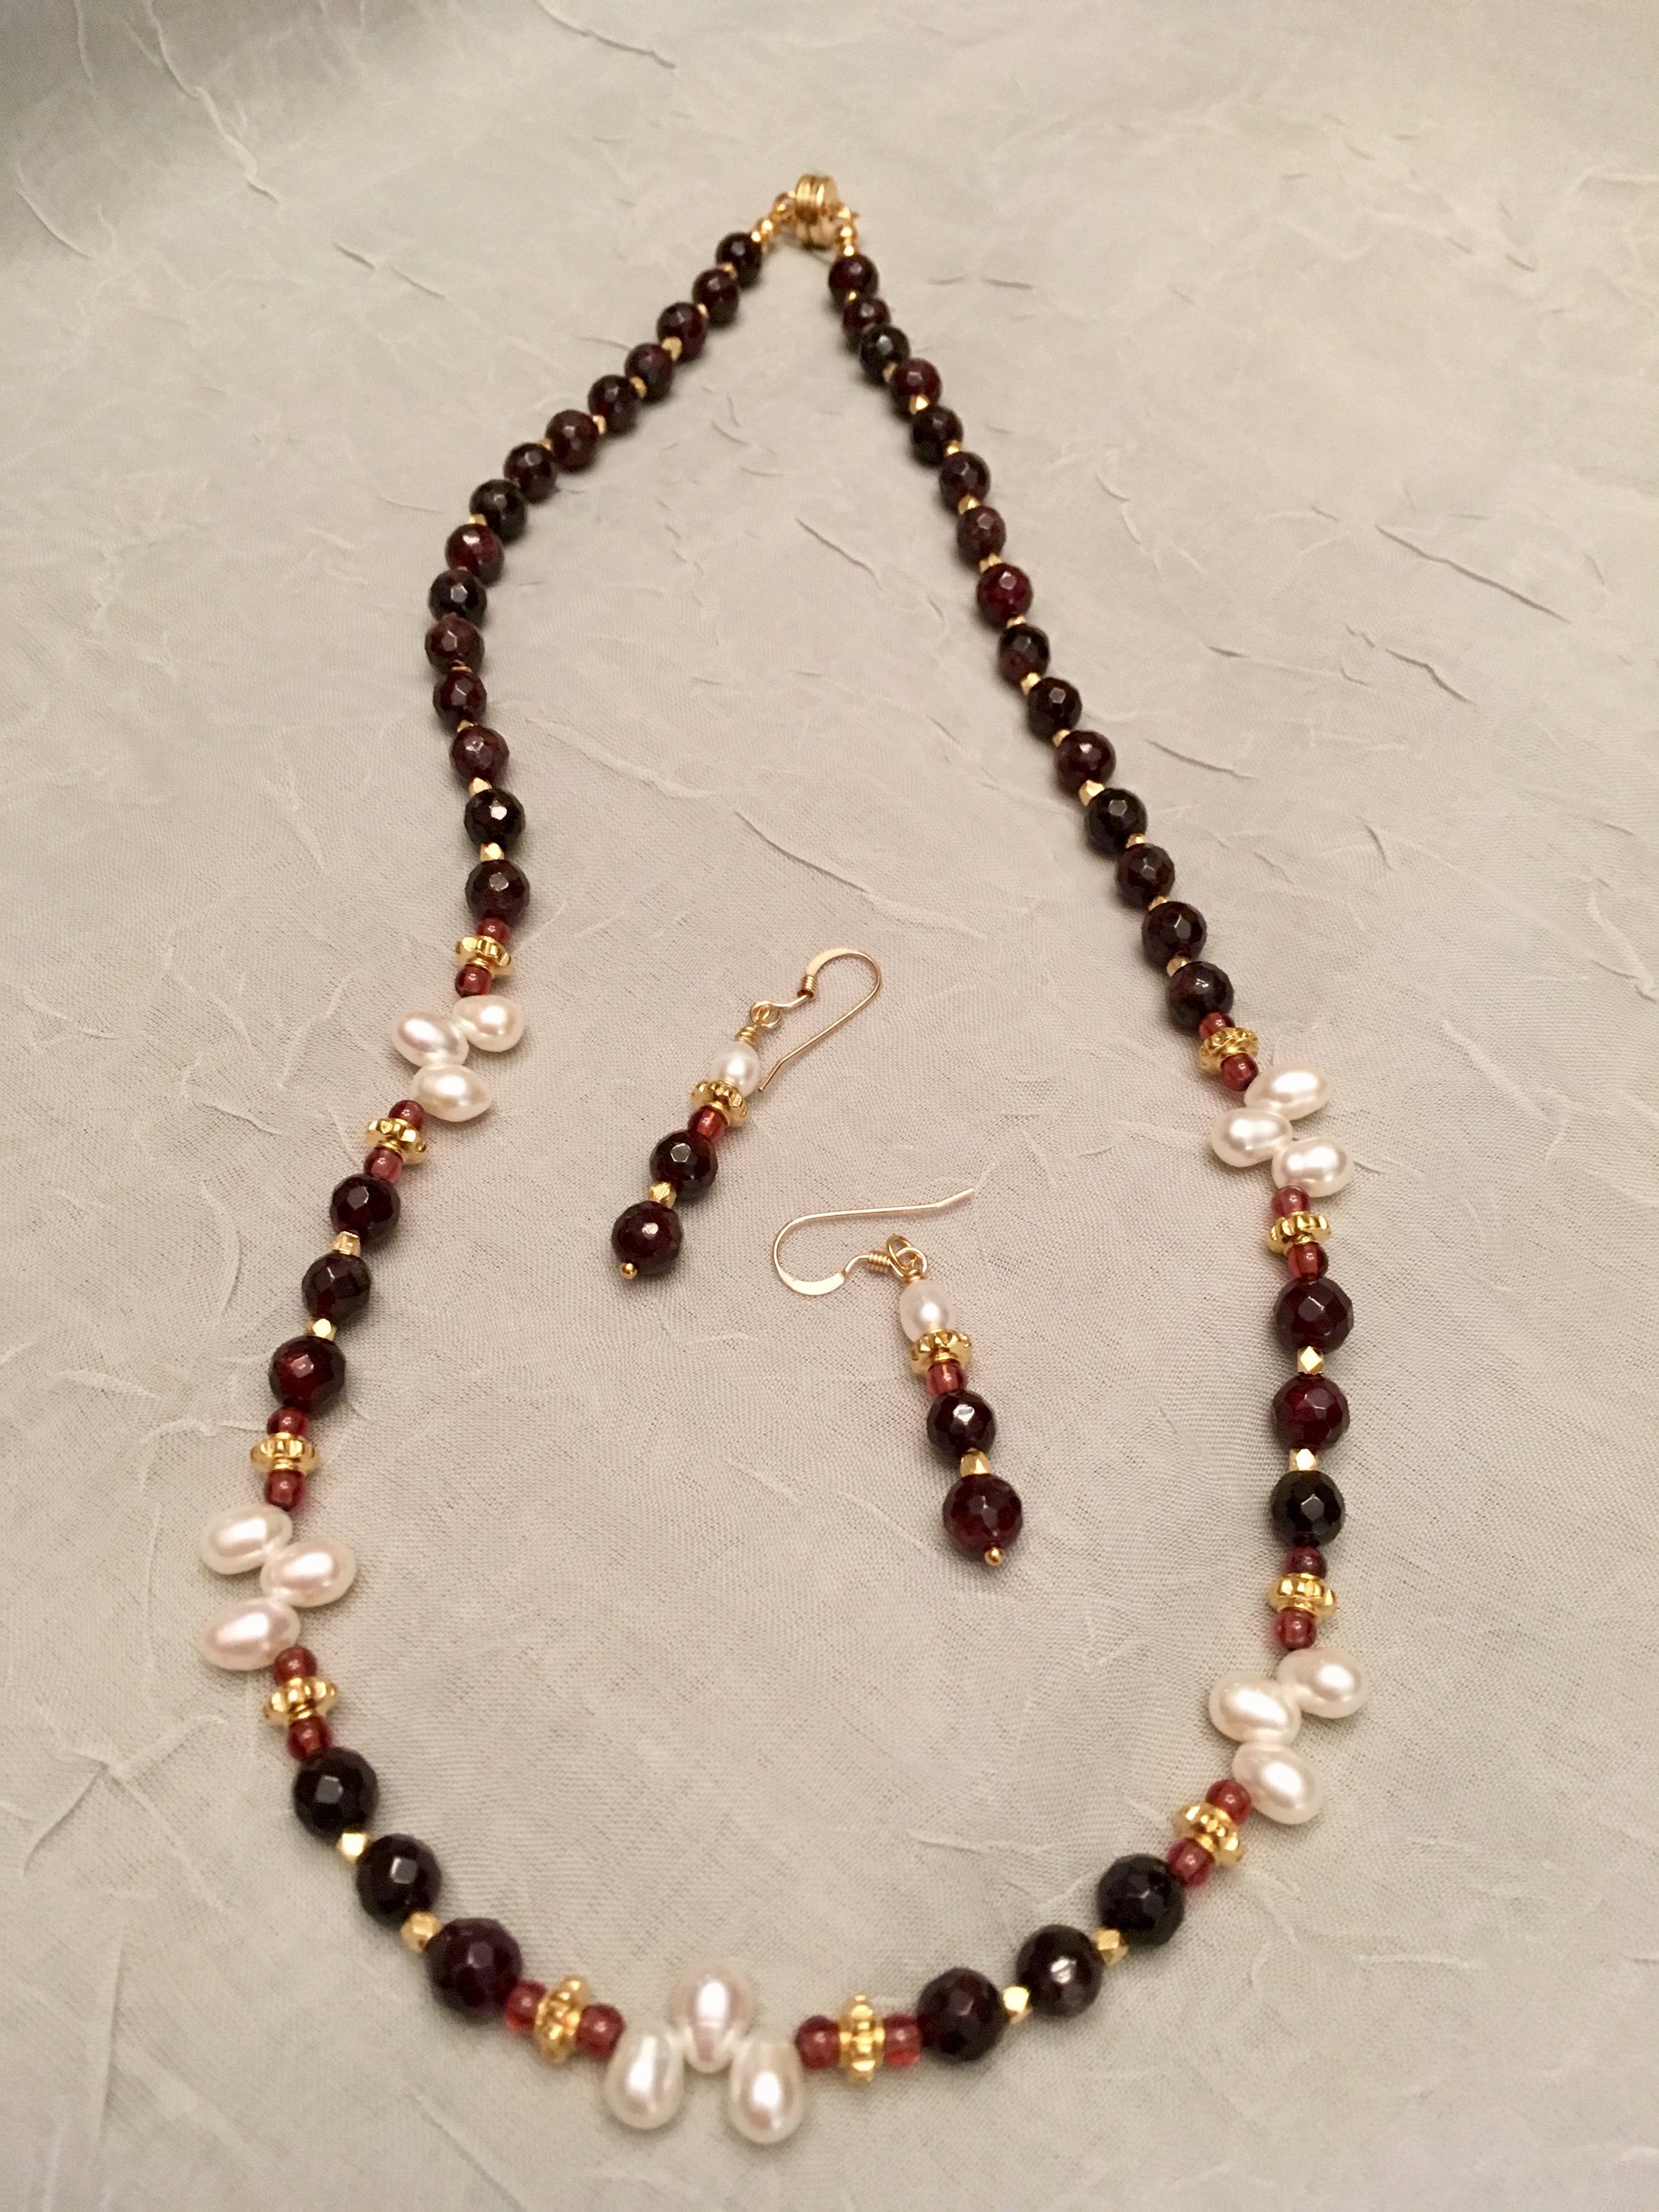 Faceted Red Garnet, FW Pearls, Vermeil Gold.  19